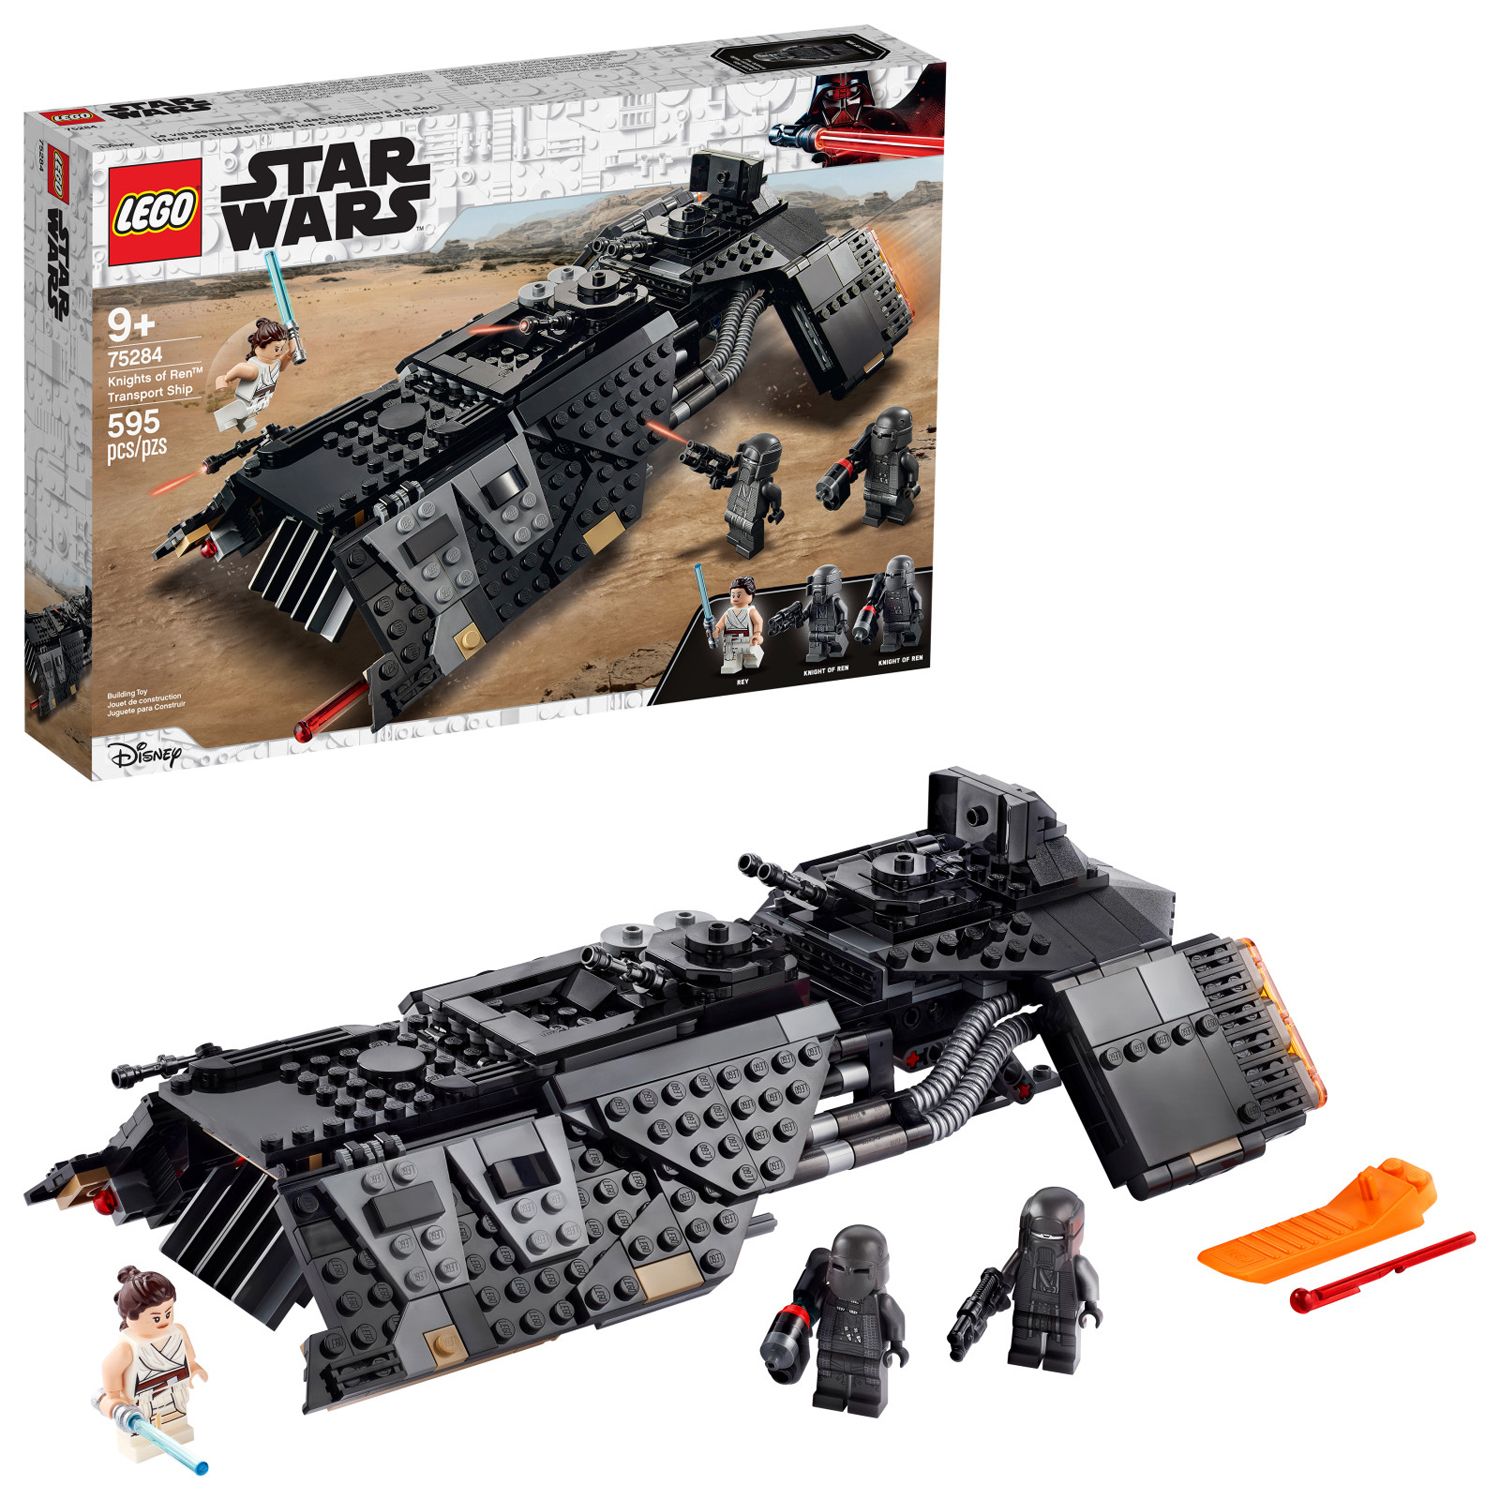 Image for LEGO Star Wars Knights of Ren Transport Ship 75284 Set (595 Pieces) at Kohl's.